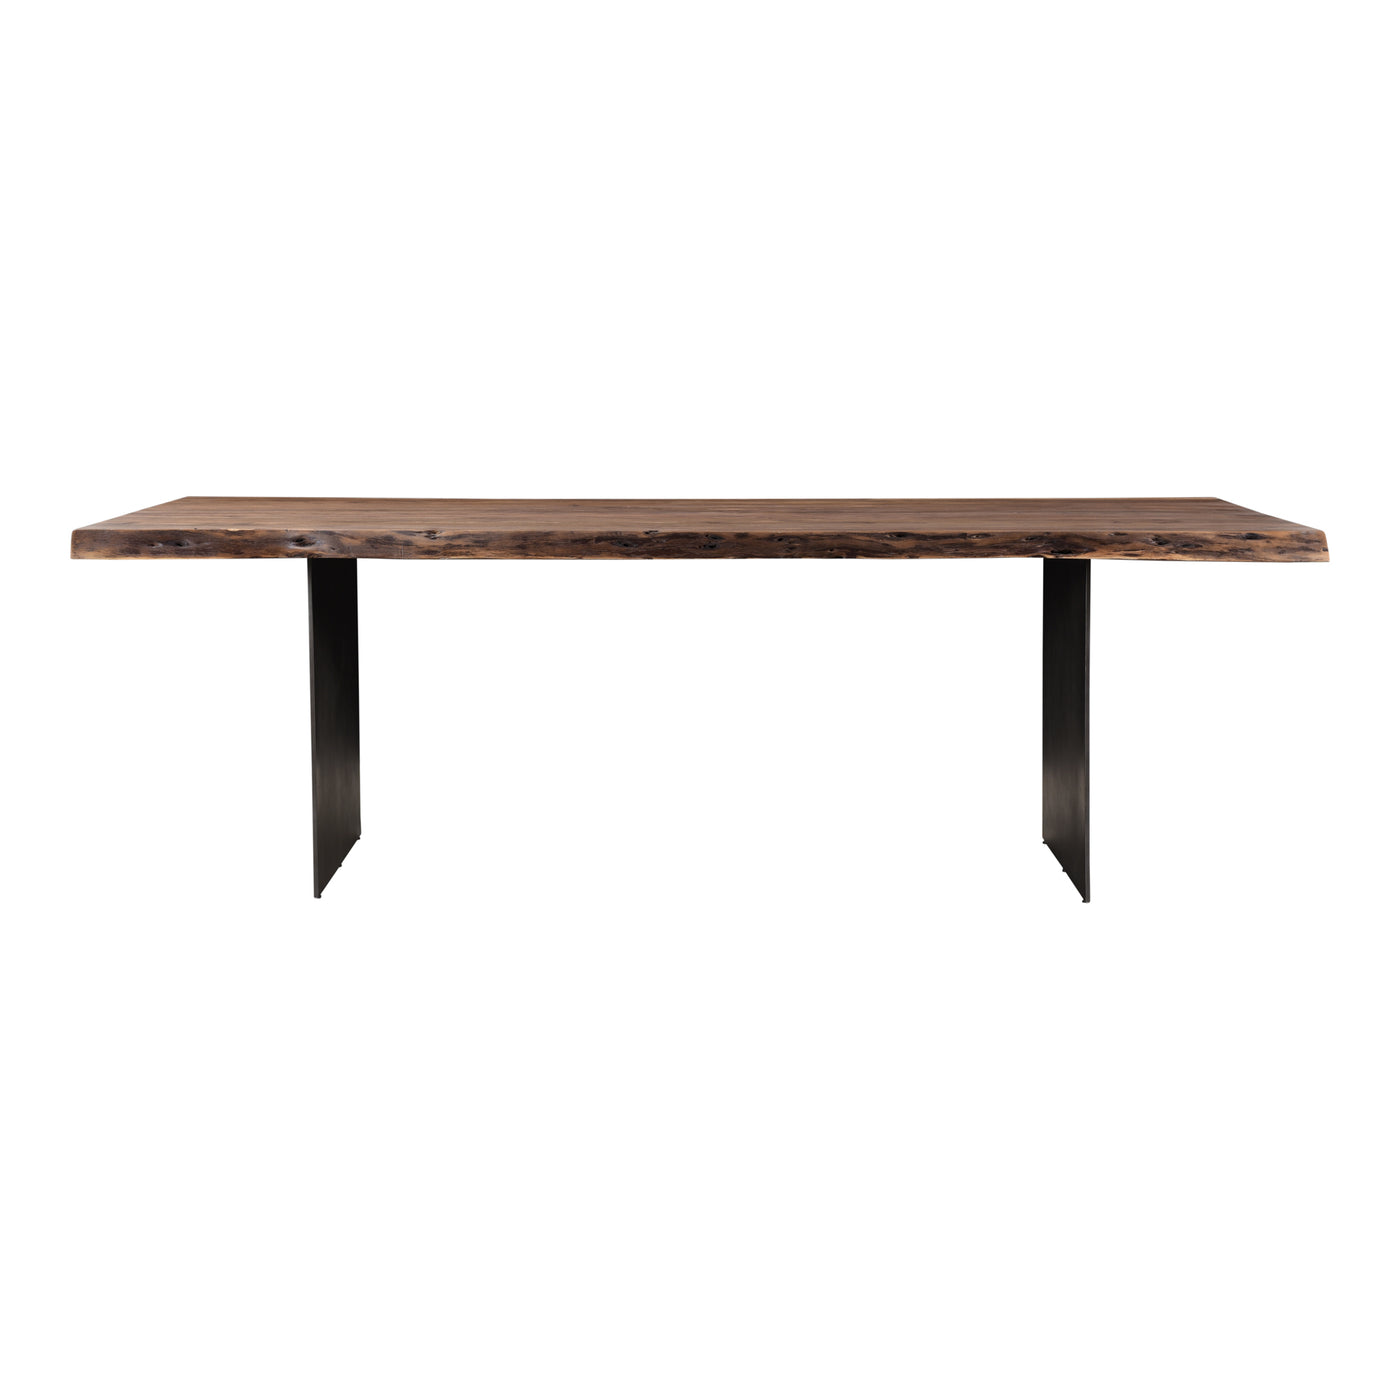 Strength and subtlety meet in harmony with the Howell dining table. Its solid acacia tabletop features a live edge, with k...